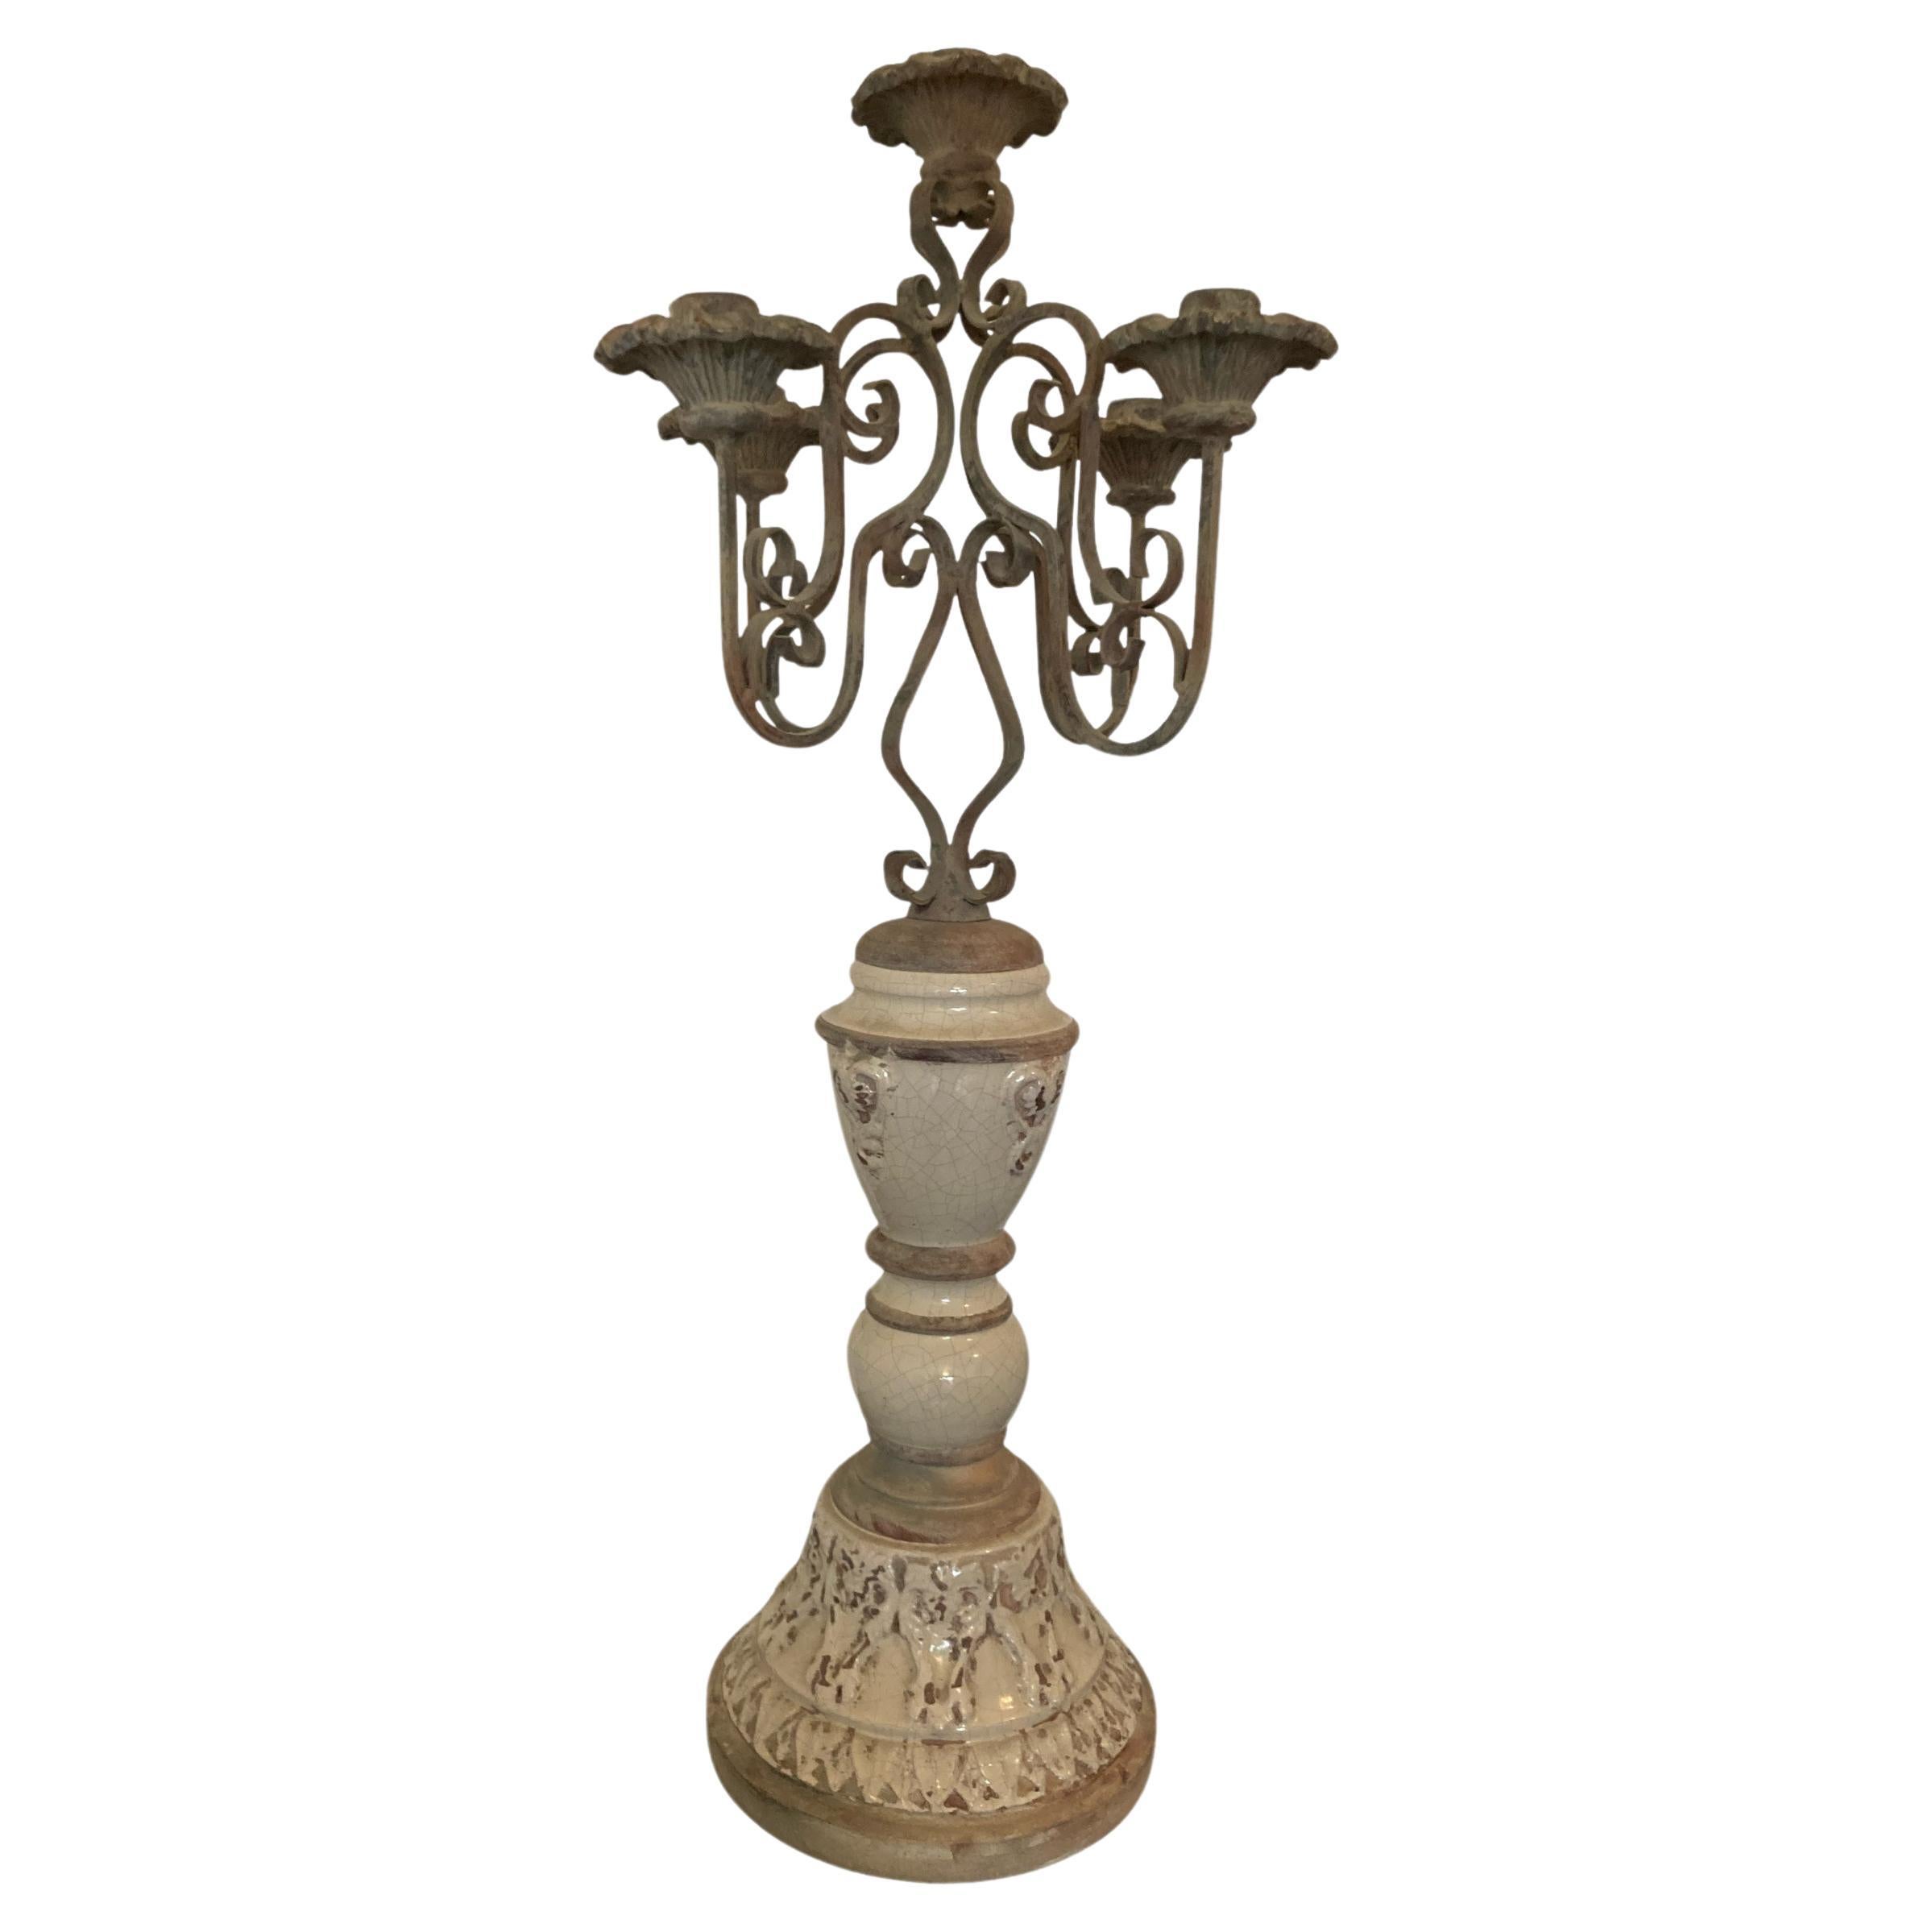 Gothic Style Five candle candelabra wrought iron with ceramic base from Germany